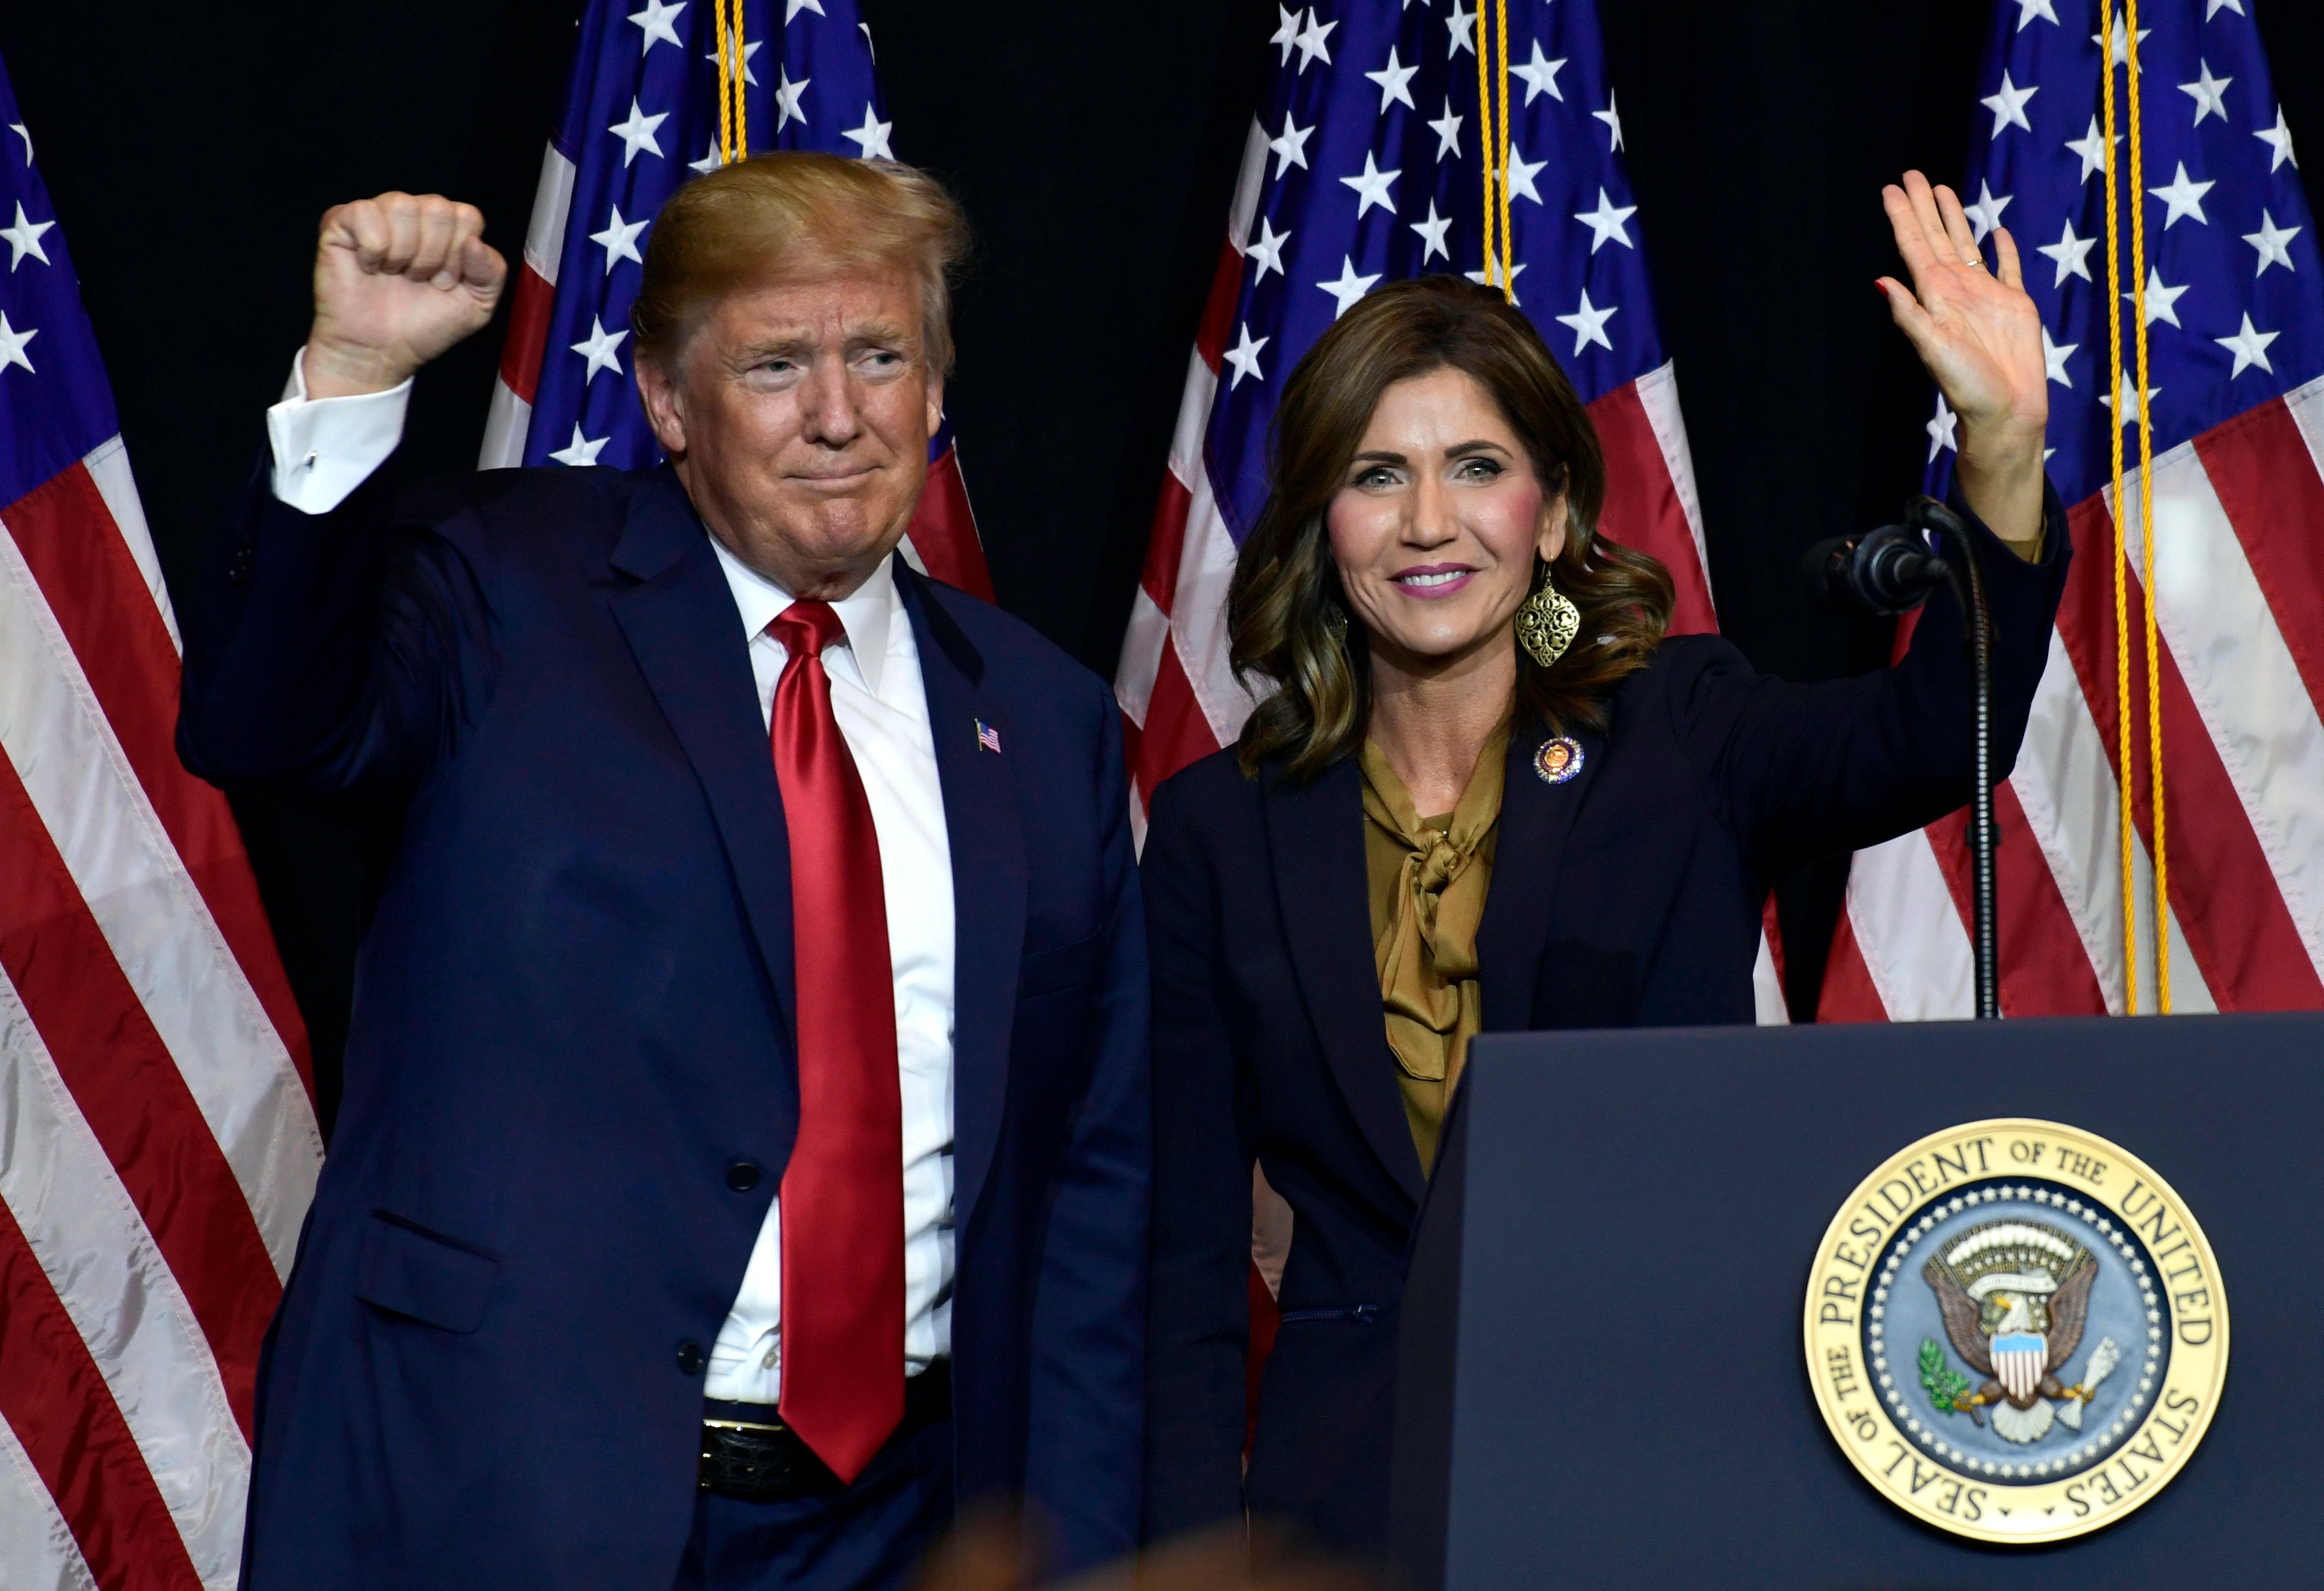 Noem is seen as a leading contender to be Donald Trump’s pick for Vice President